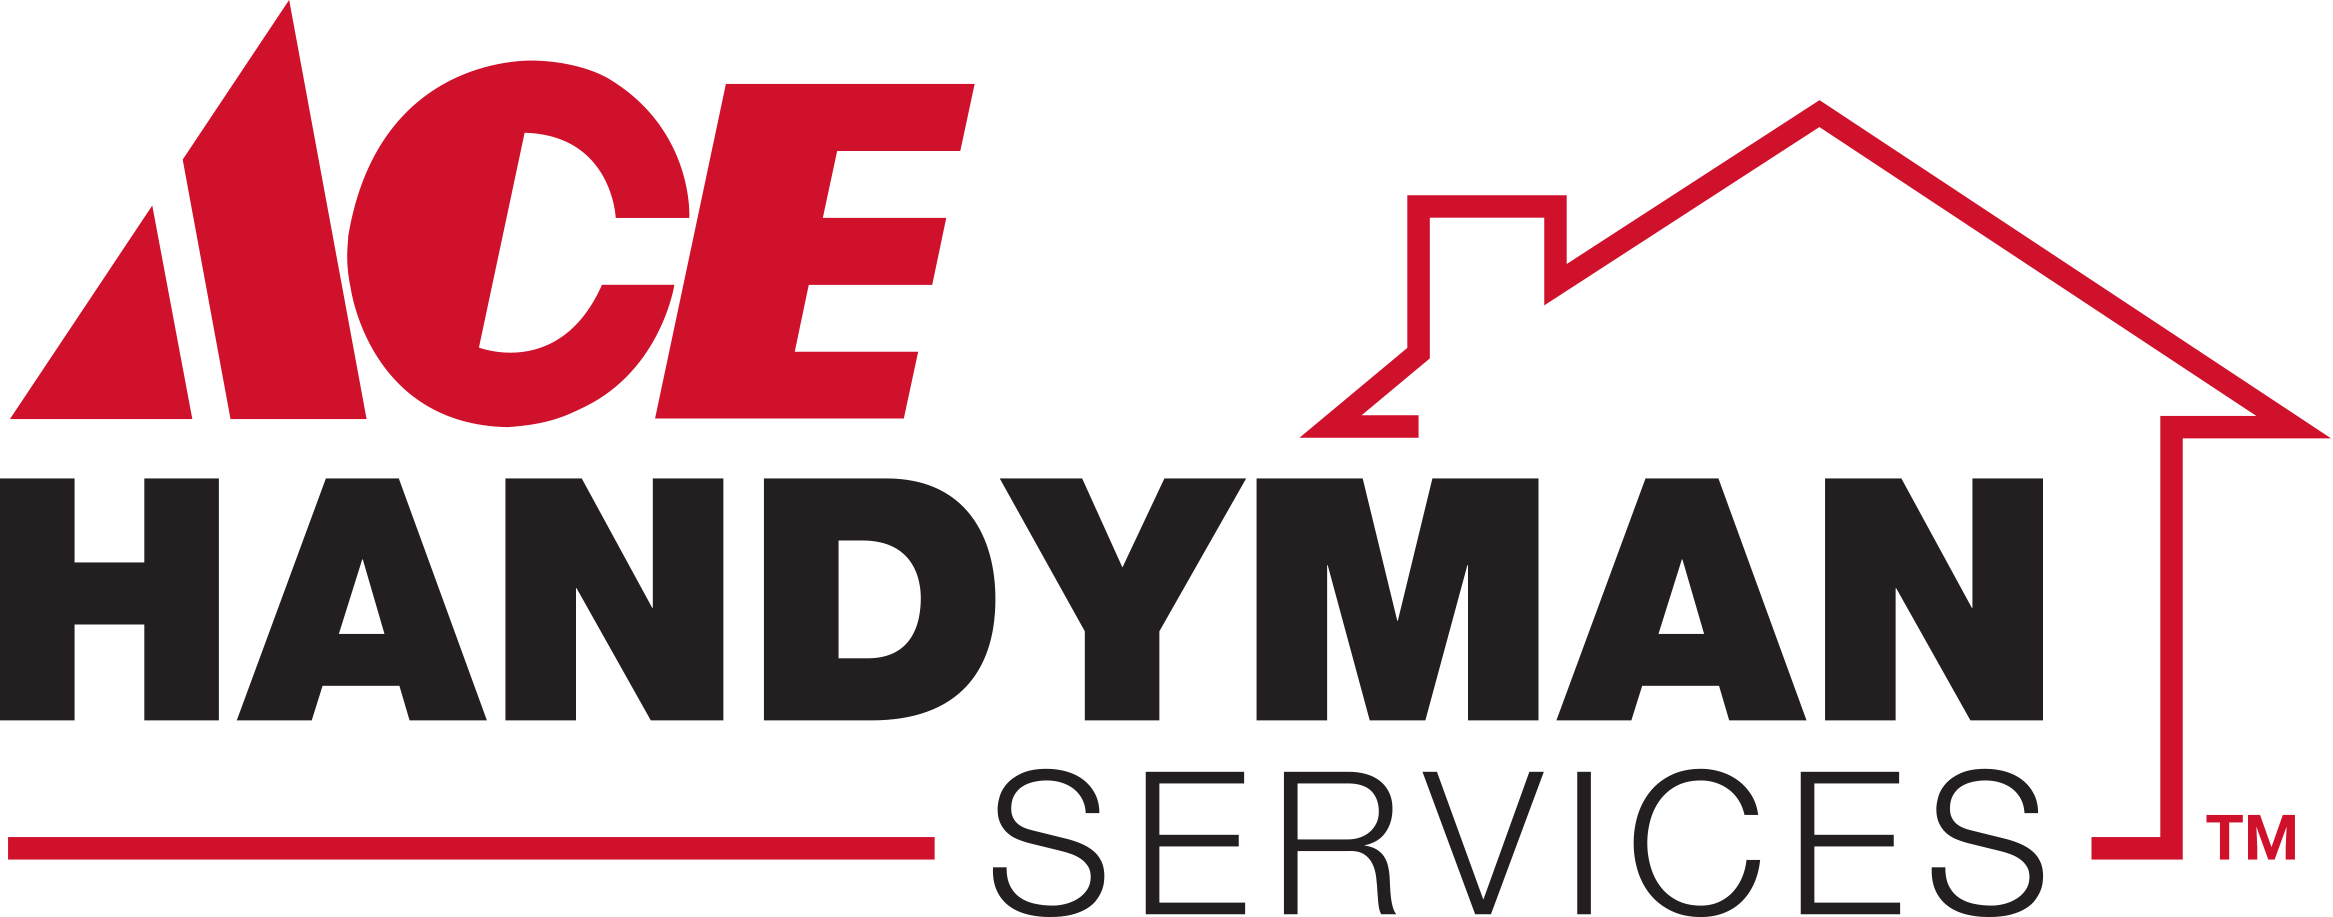 Ace Handyman Services West Knoxville Logo